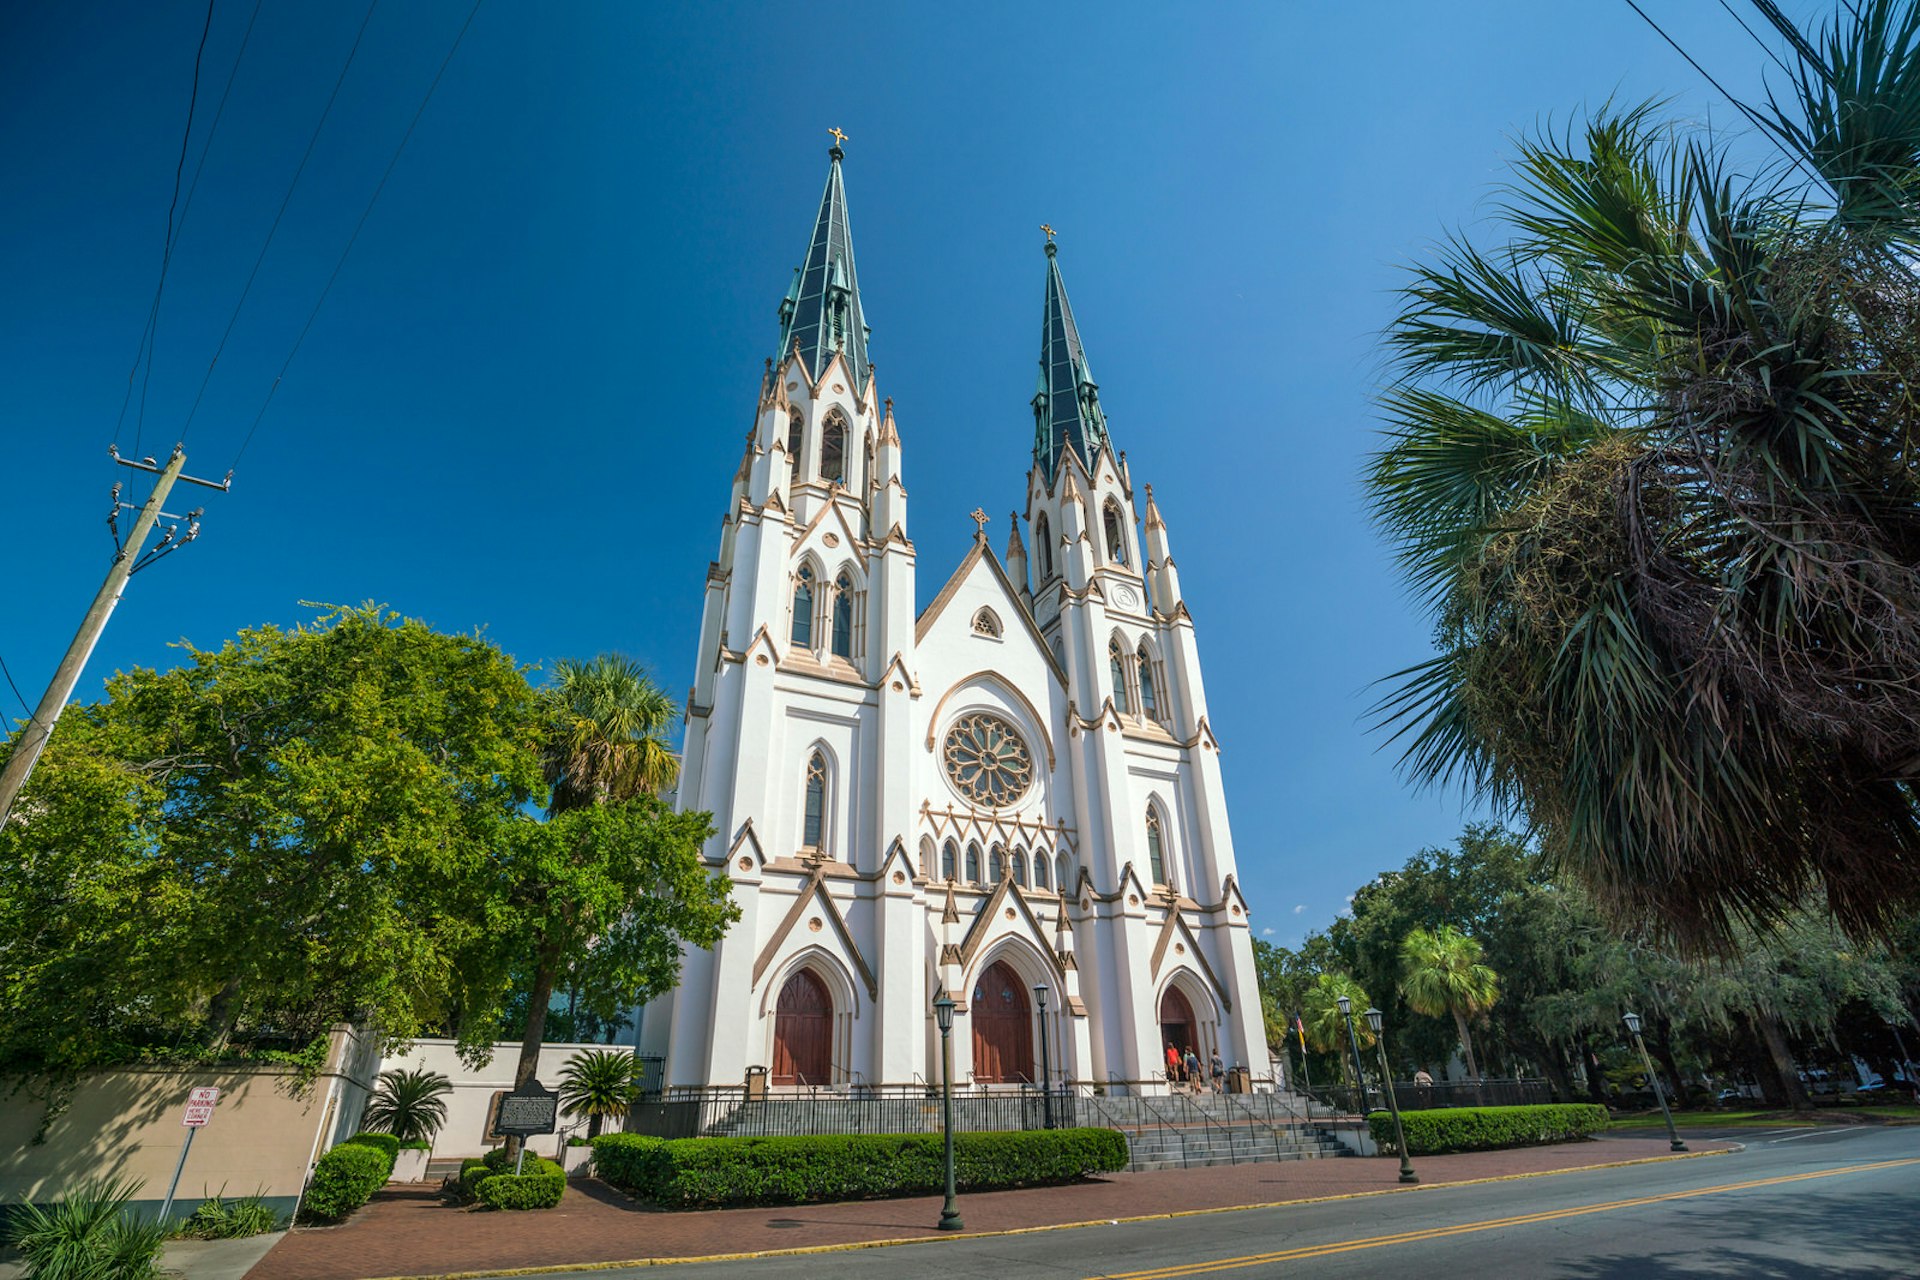 An ornate cathedral under a blue sky and trees surrounding